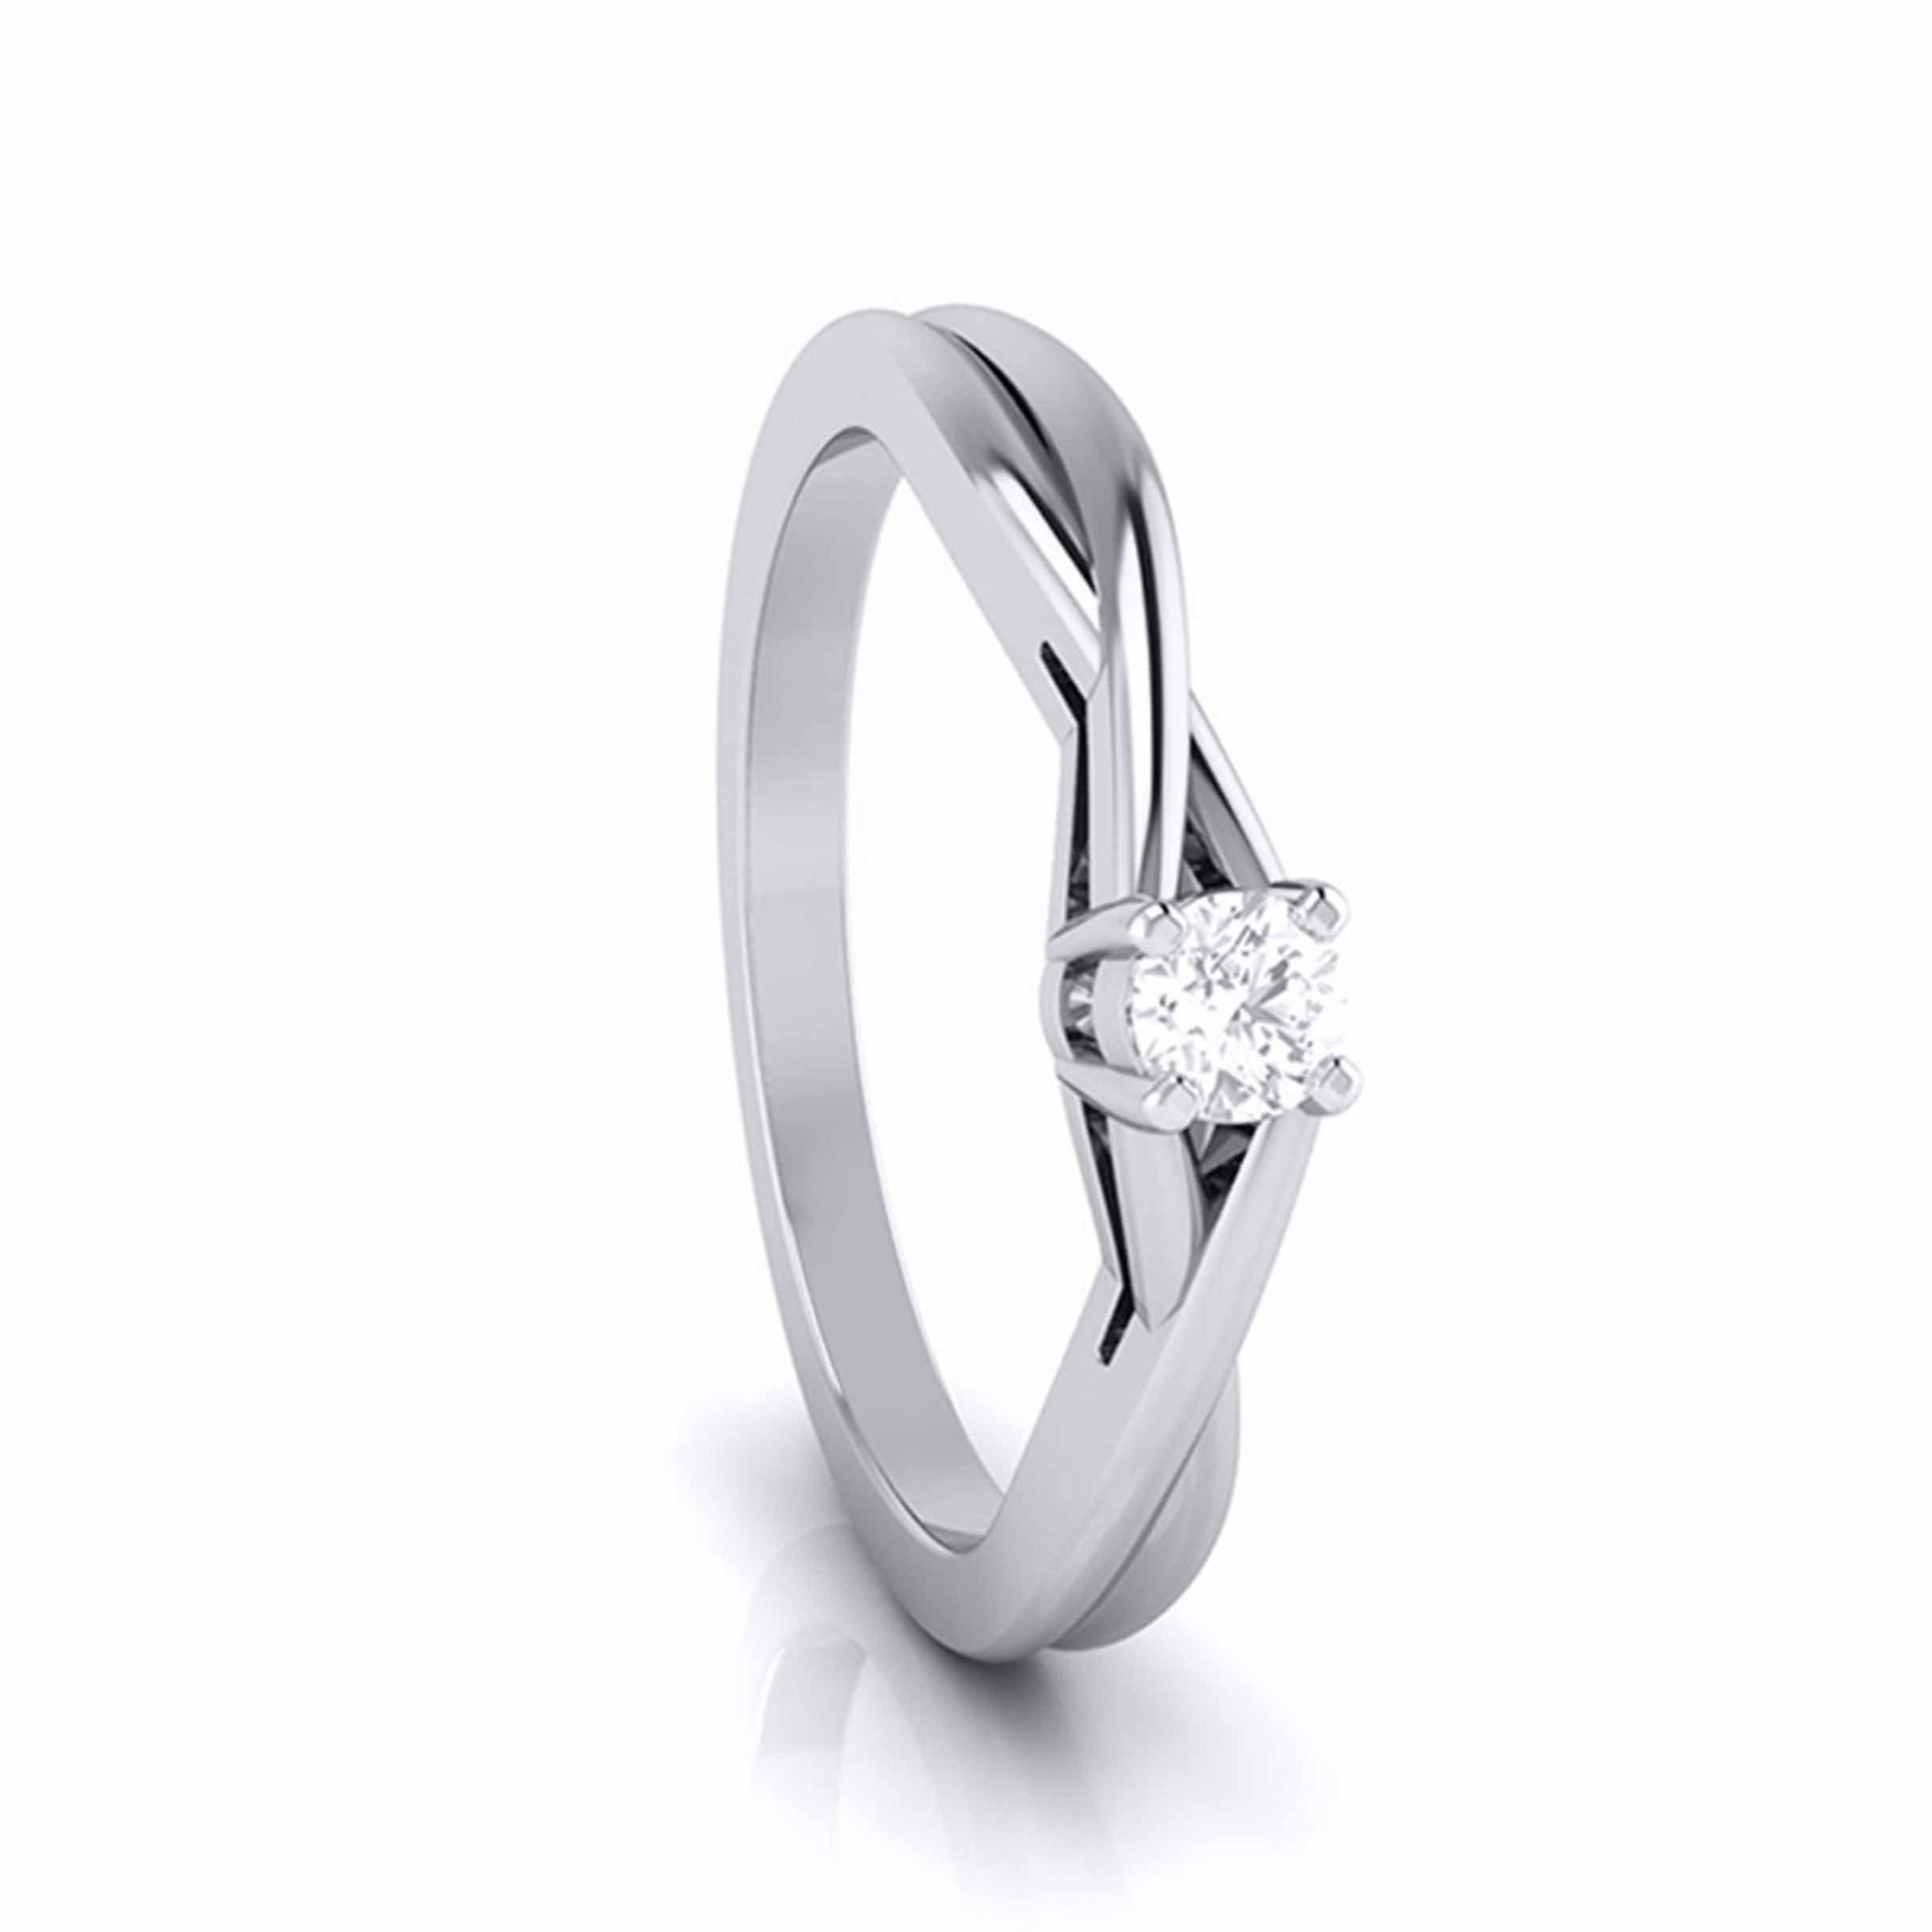 20-Pointer Platinum Solitaire Ring - Shank with a Twist JL PT G 115-A   Jewelove.US